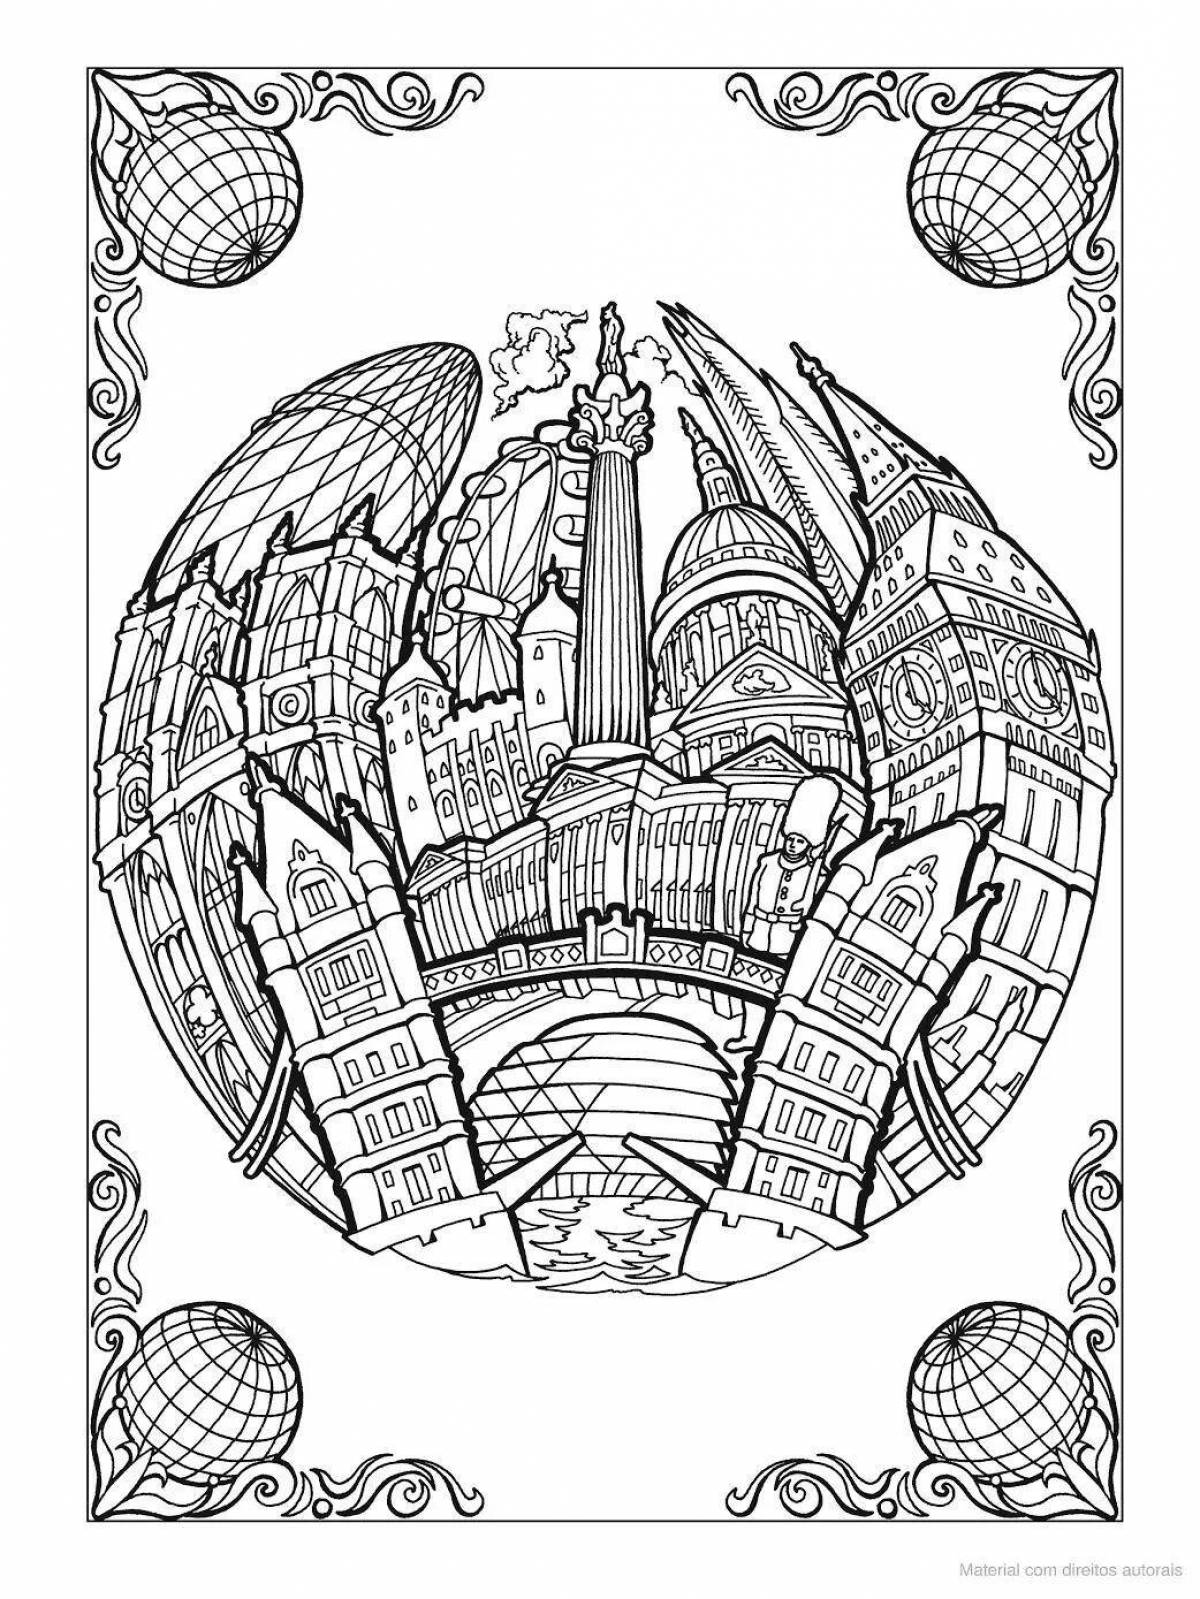 Hypnotic journey coloring page